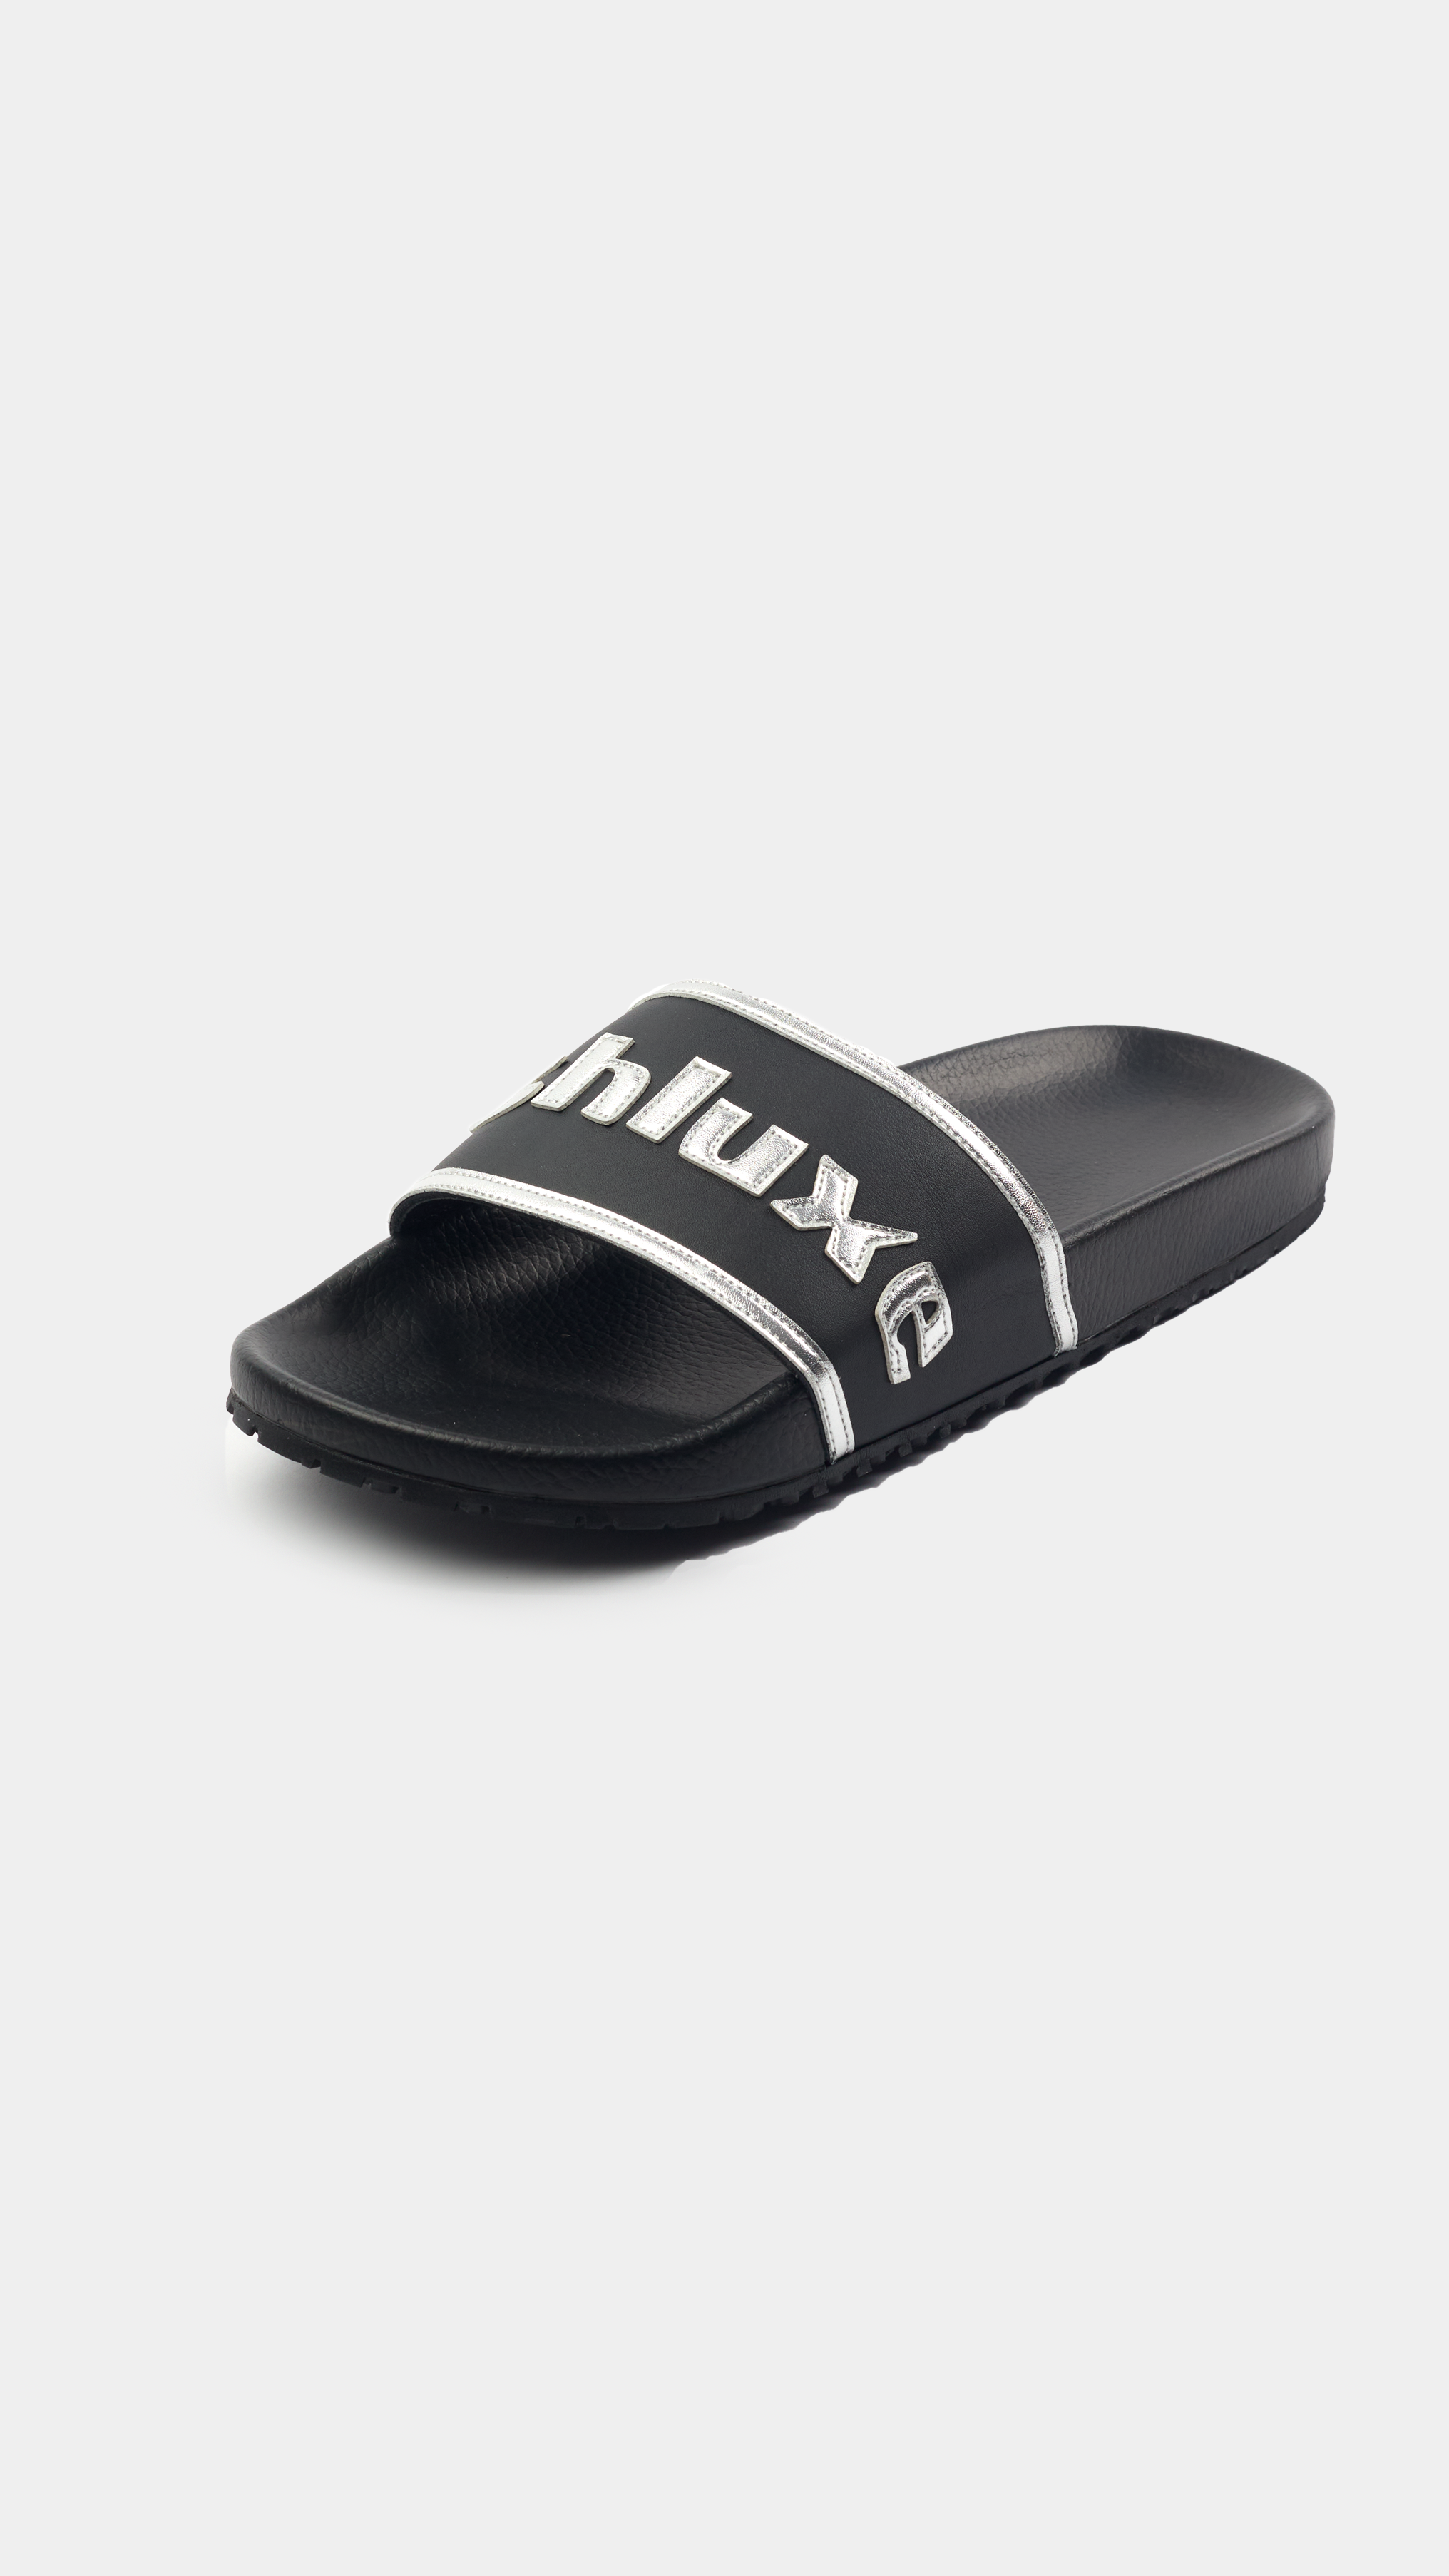 Ashluxe Stitched Leather Slides - Black